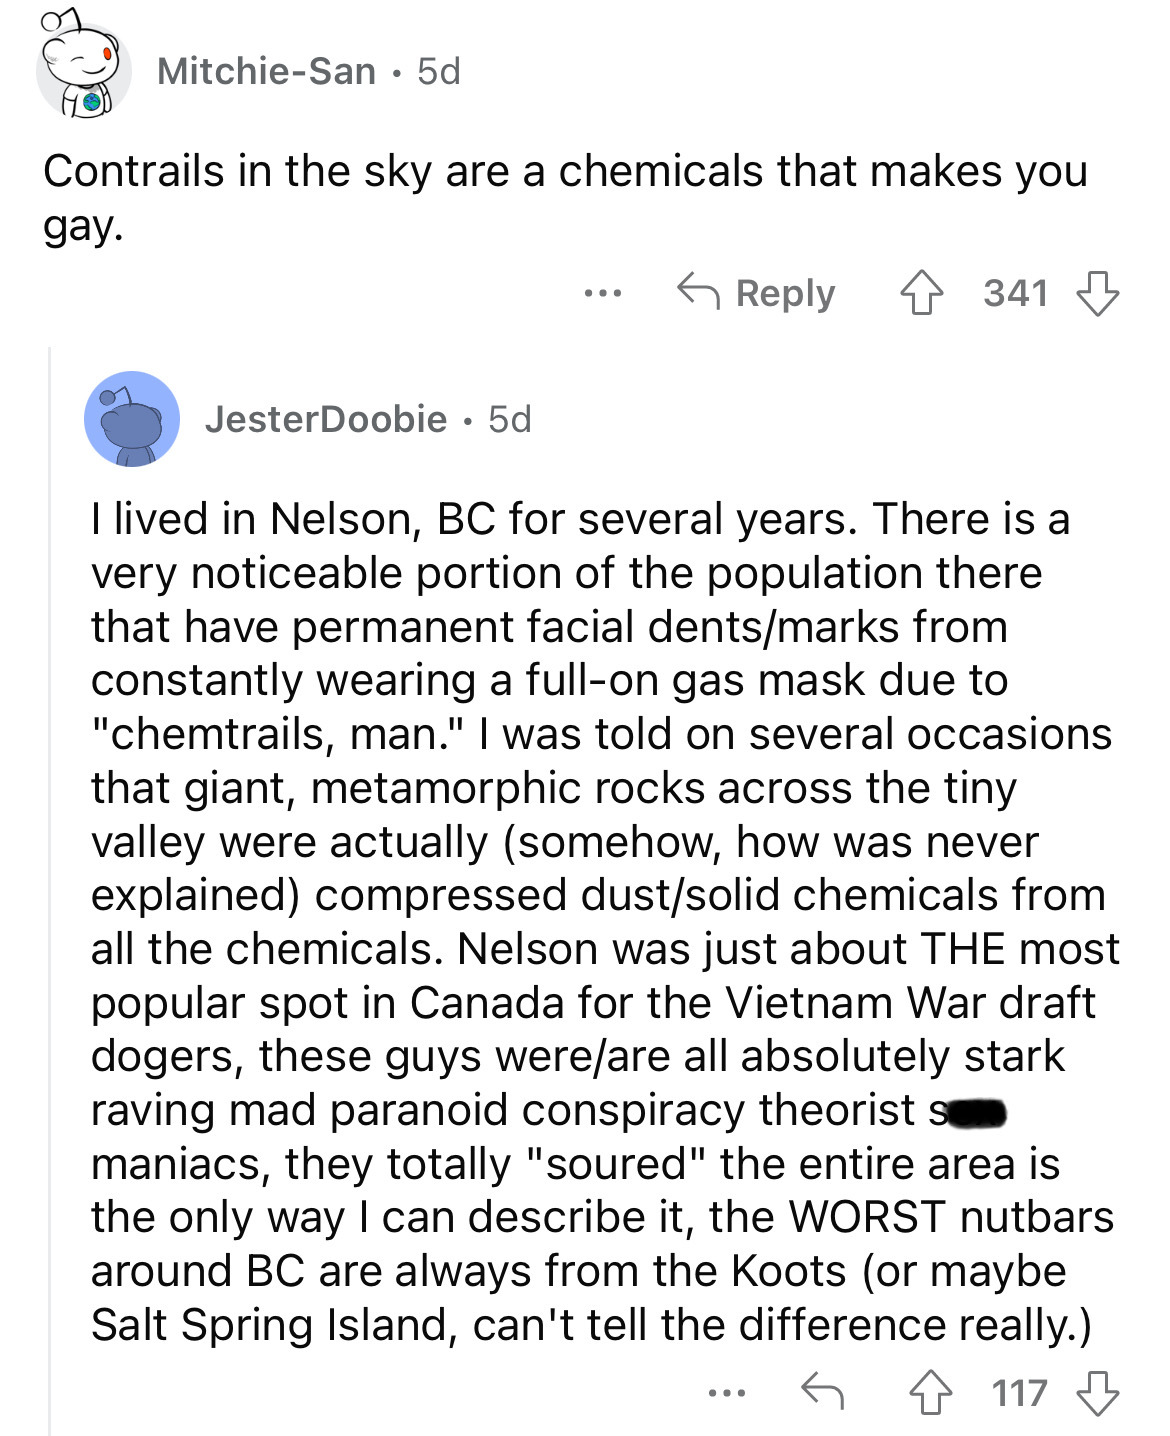 document - MitchieSan. 5d Contrails in the sky are a chemicals that makes you gay. JesterDoobie 5d 4341 I lived in Nelson, Bc for several years. There is a very noticeable portion of the population there that have permanent facial dentsmarks from constant